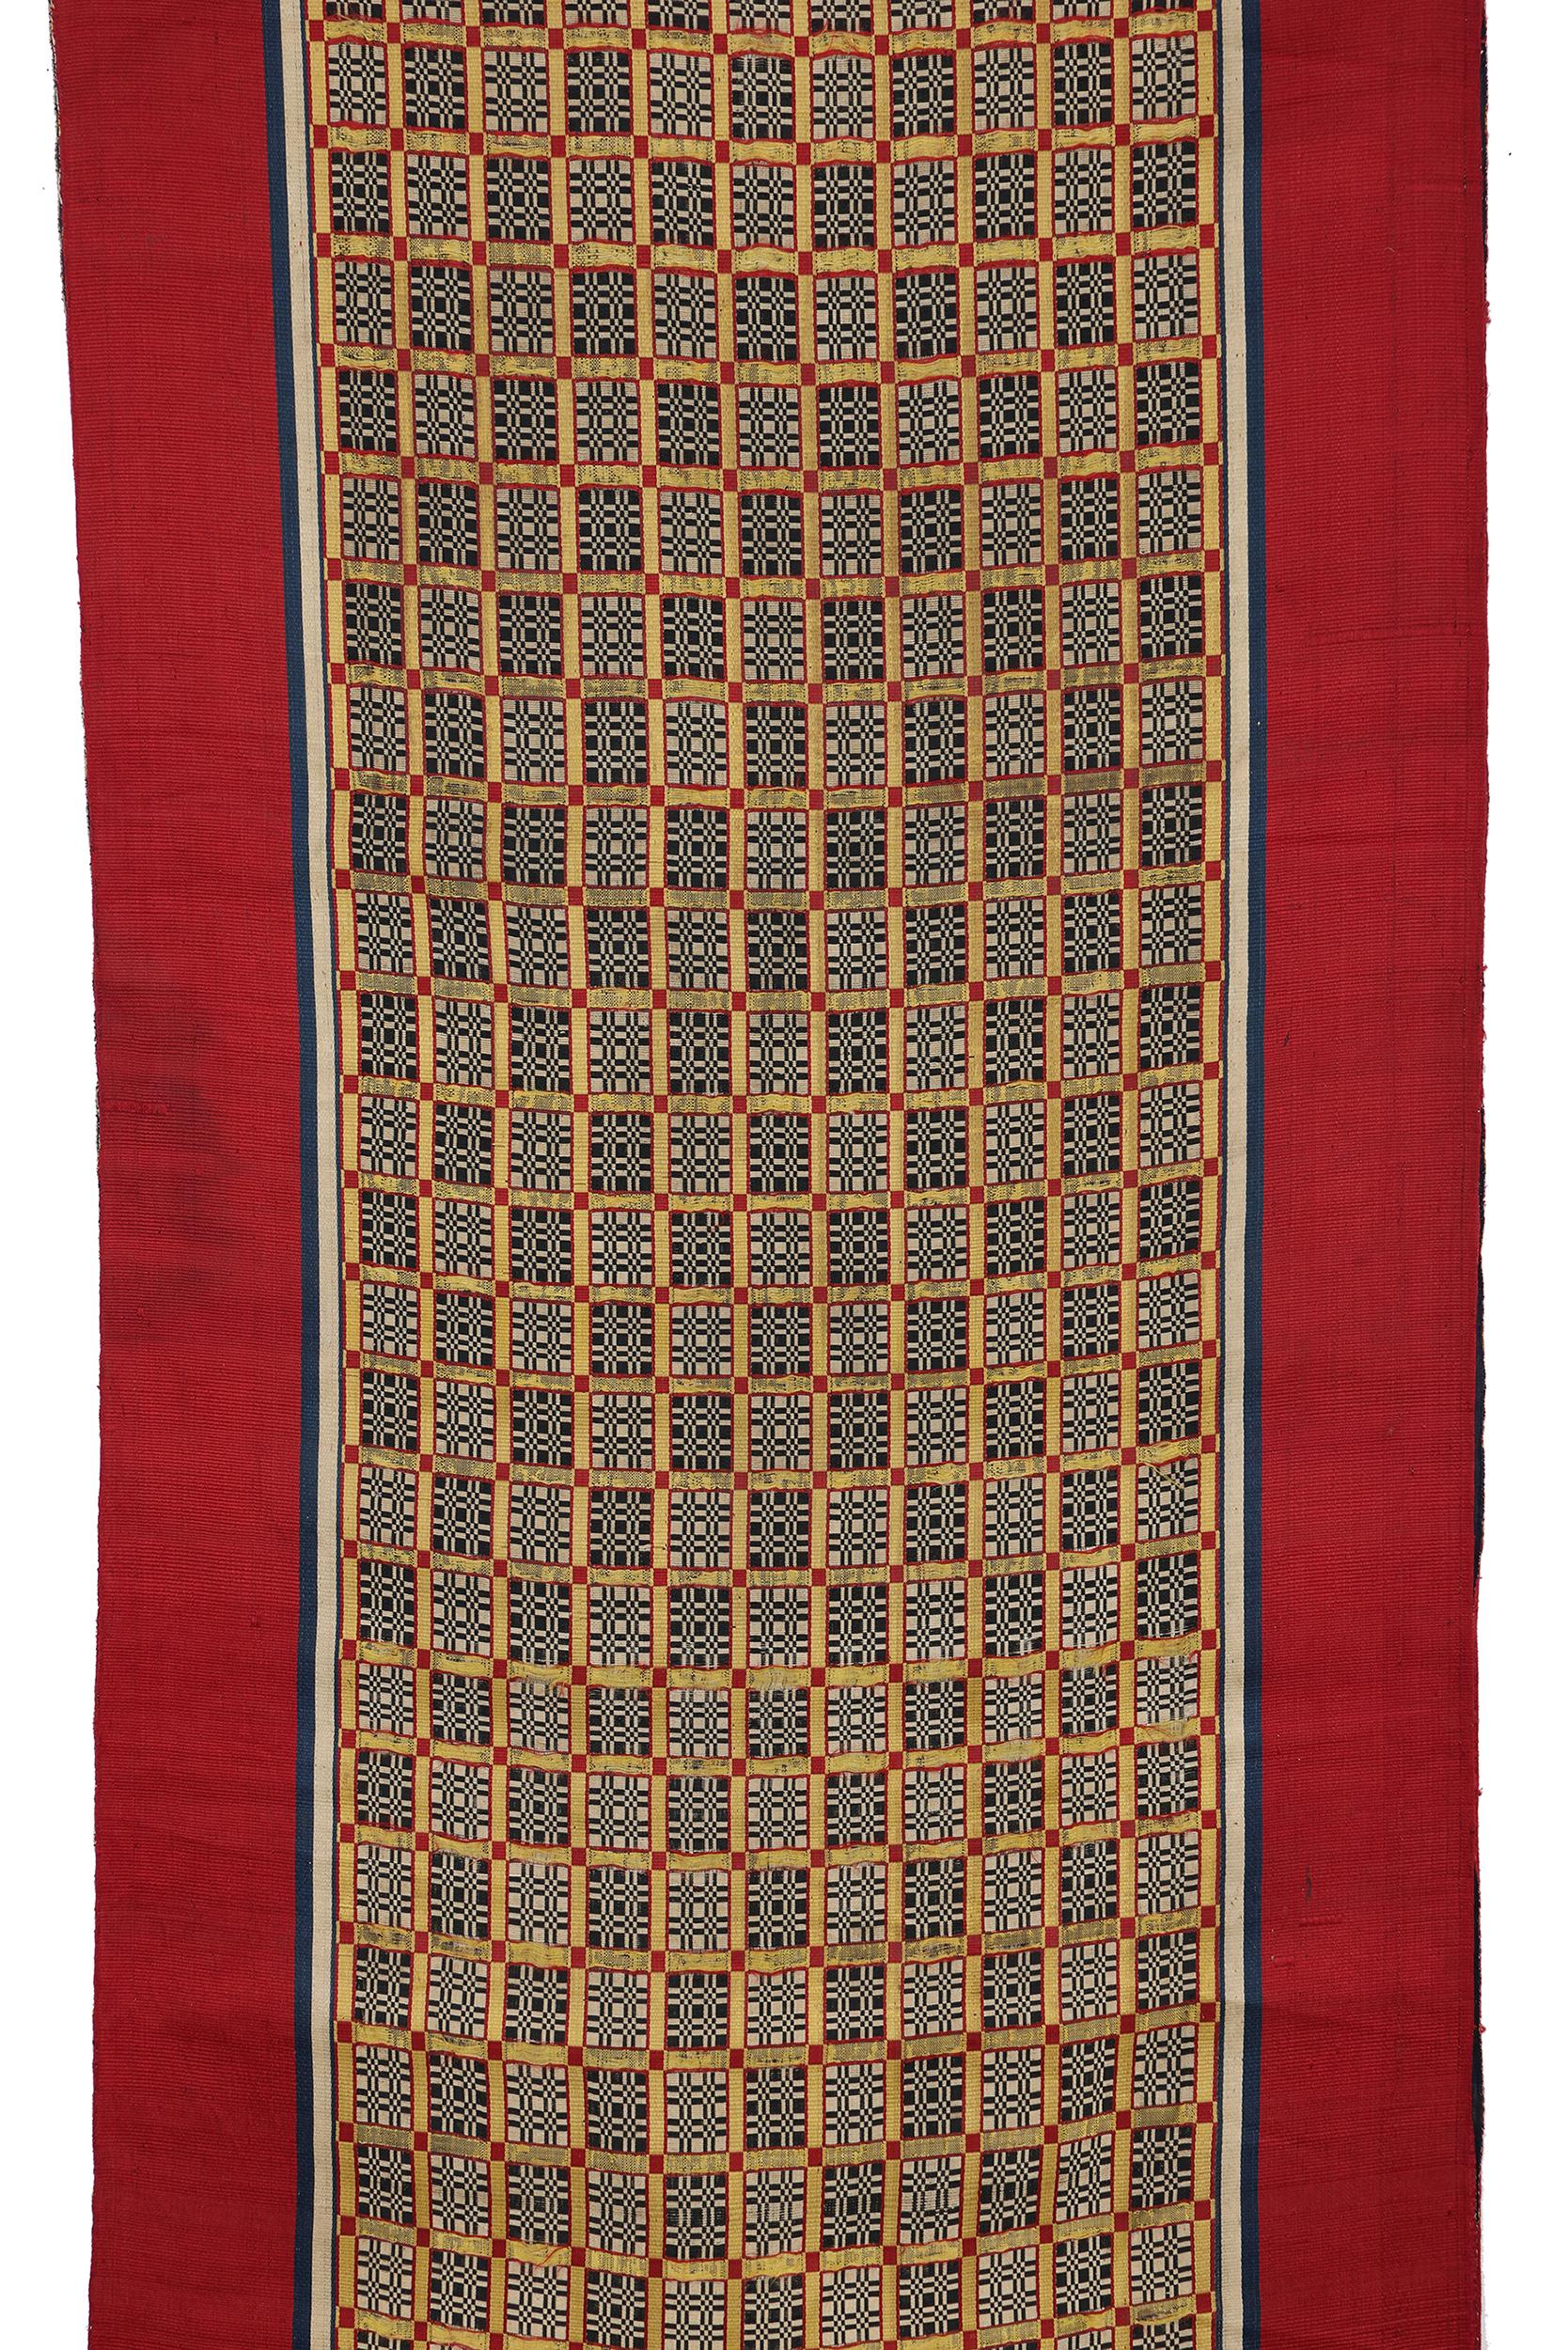 A Hanging or Curtain for a Wedding Alcove or Reception Room
Tetouan, Morocco
19th century
Silk strip weave with double weave patterning
129 x 24 ins (61 x 328 cm)

This luxurious, shimmering cloth is one of a set of four panels woven by Jewish